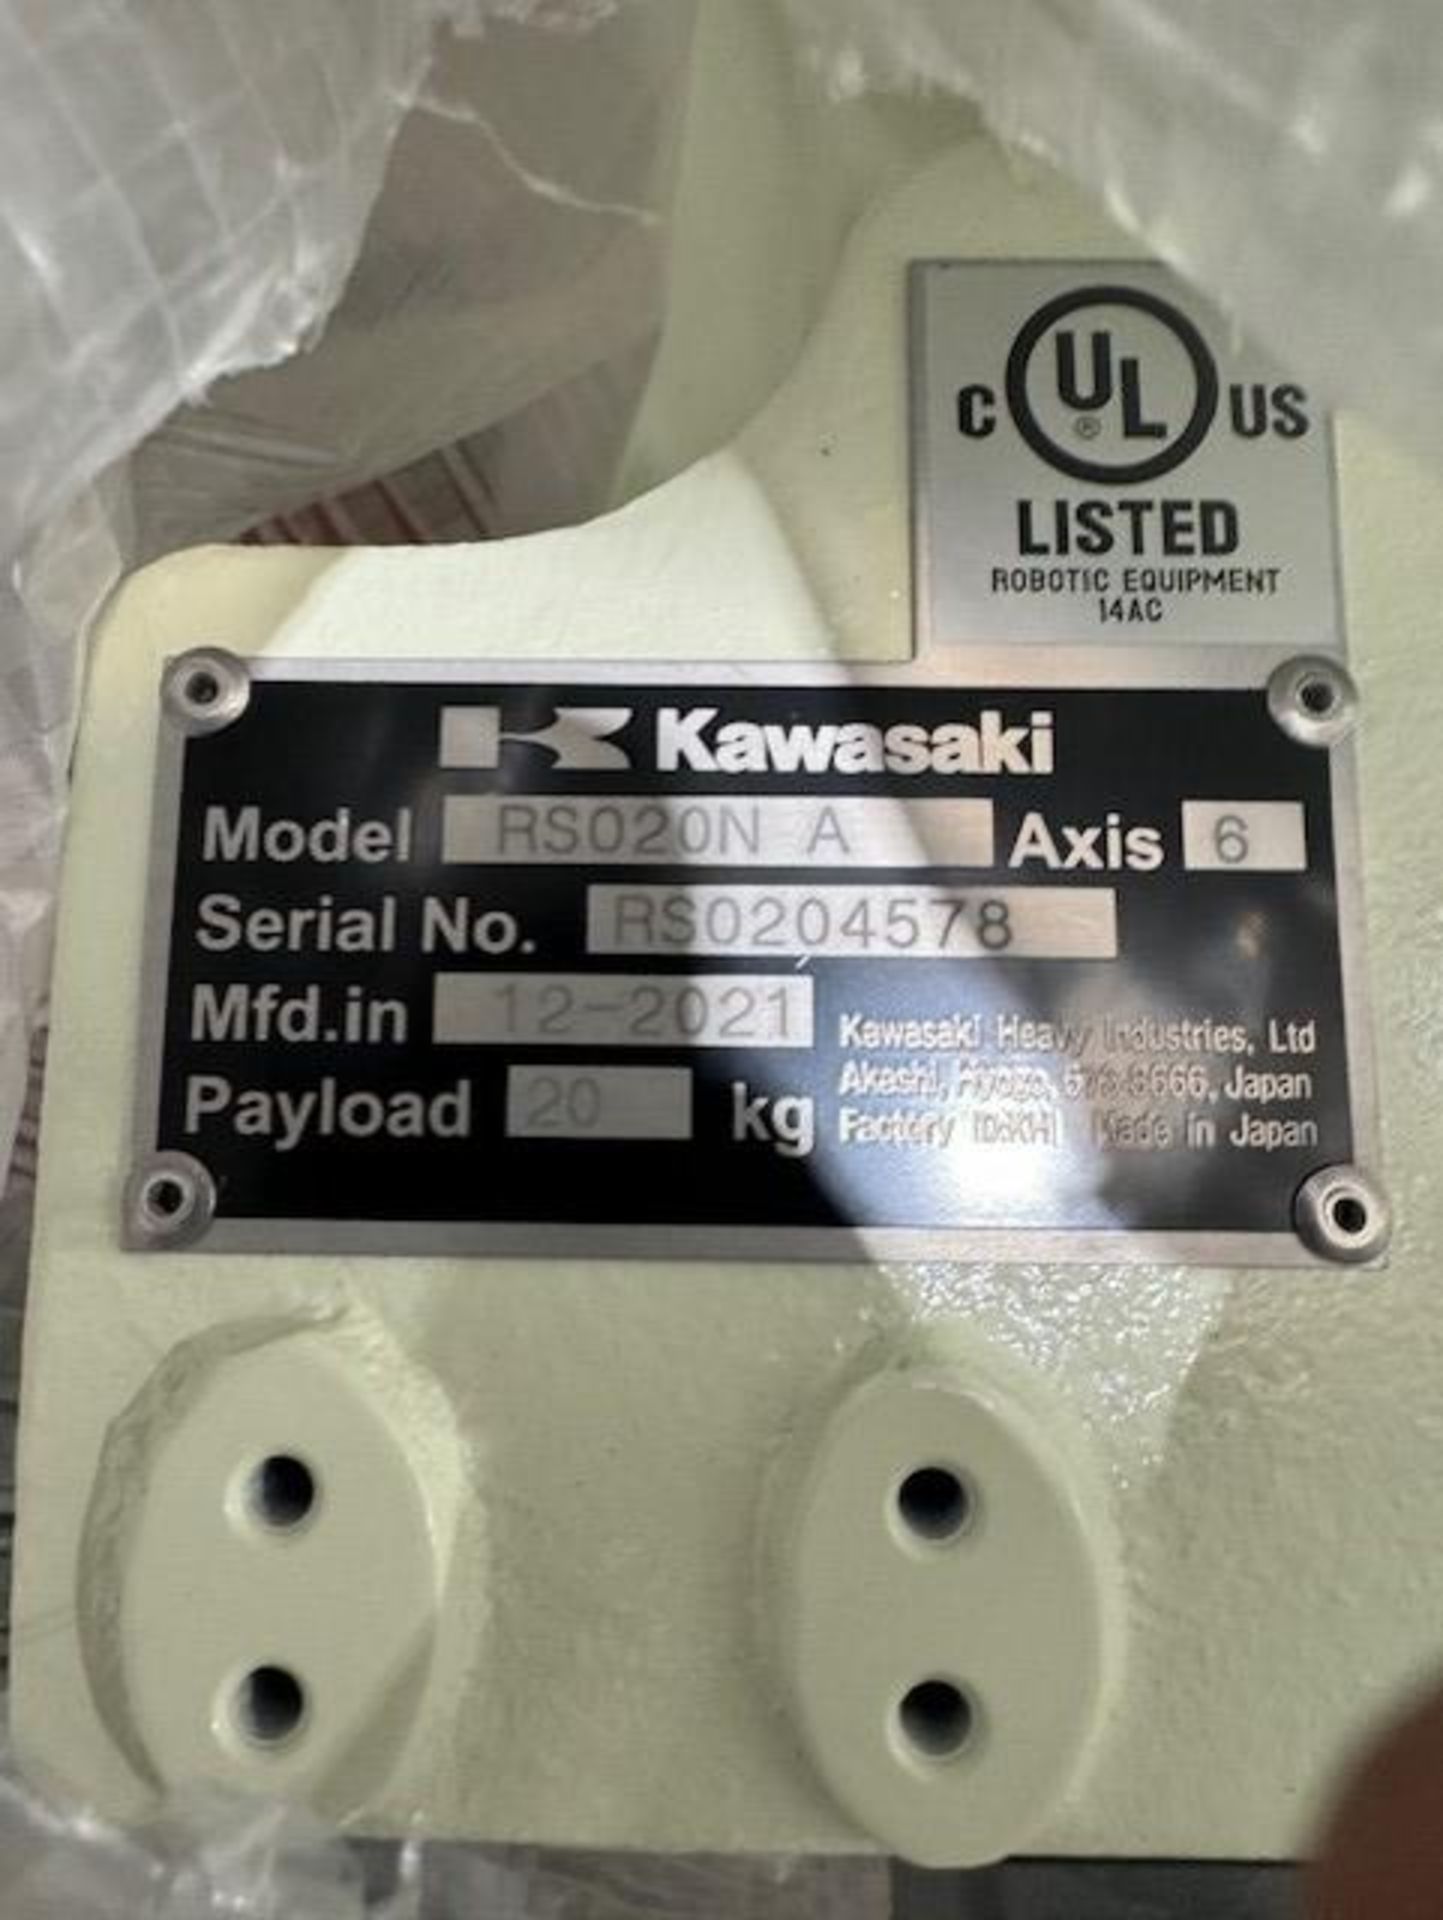 NEW KAWASAKI ROBOT MODEL RS020N, SN 4578, 20KG X 1725MM REACH WITH EO1 CONTROLS, CABLES & TEACH - Image 5 of 7